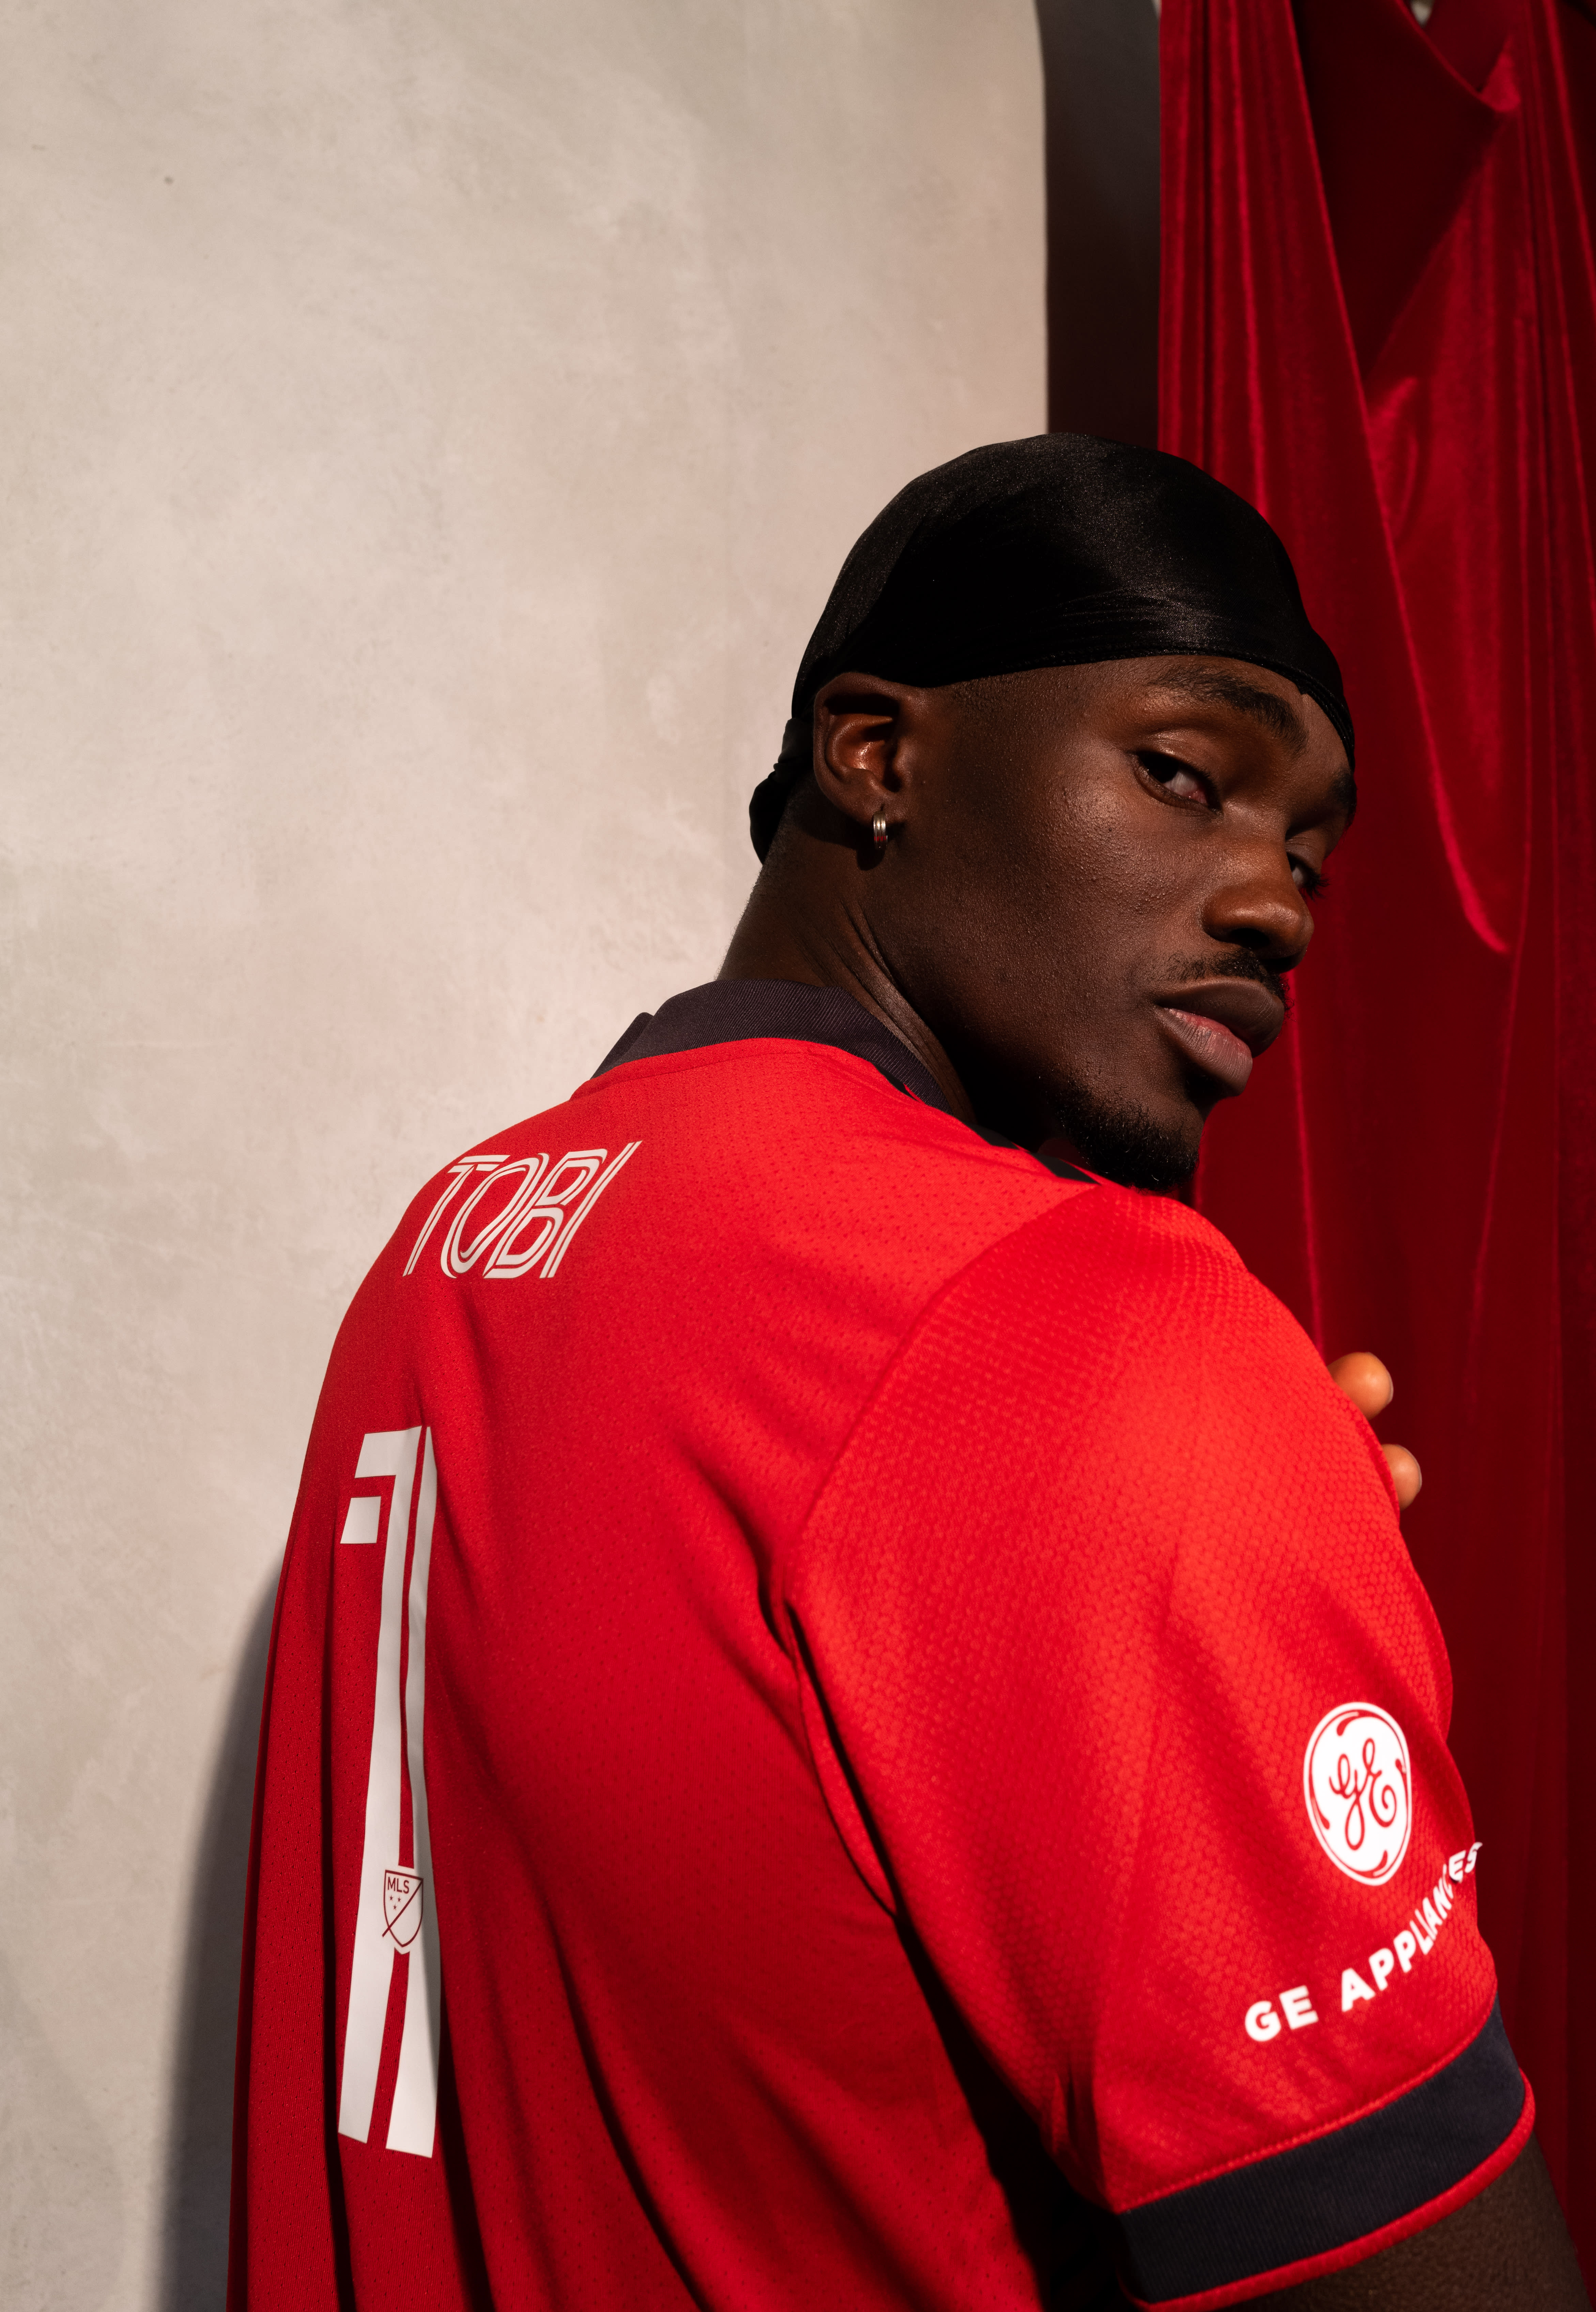 Tobi posting in a red Toronto FC jersey from the back looking over his shoulder